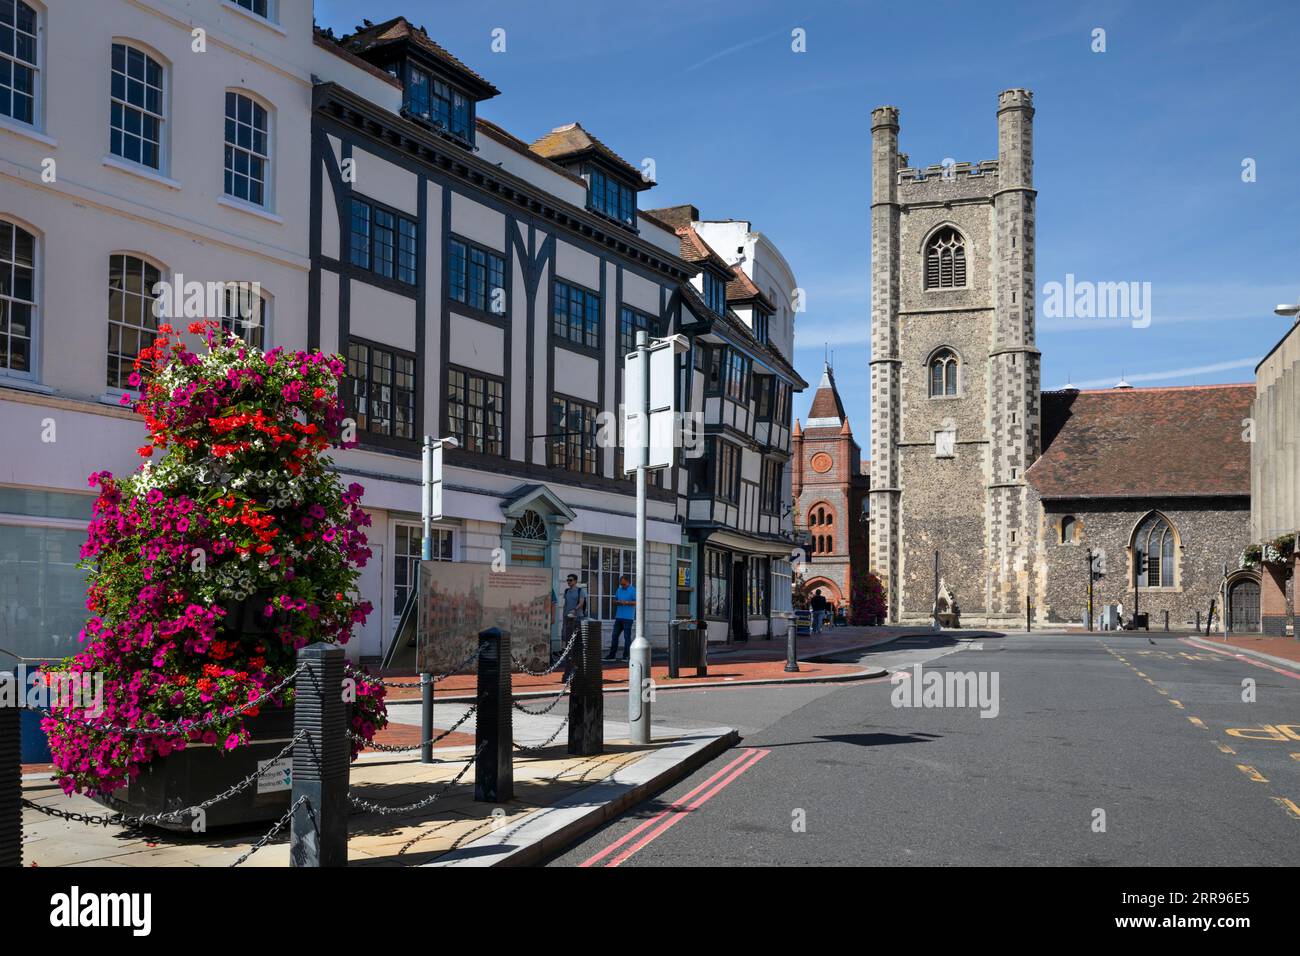 The Market Place and St Laurence Church in the town centre, Reading, Berkshire, England, United Kingdom, Europe Stock Photo